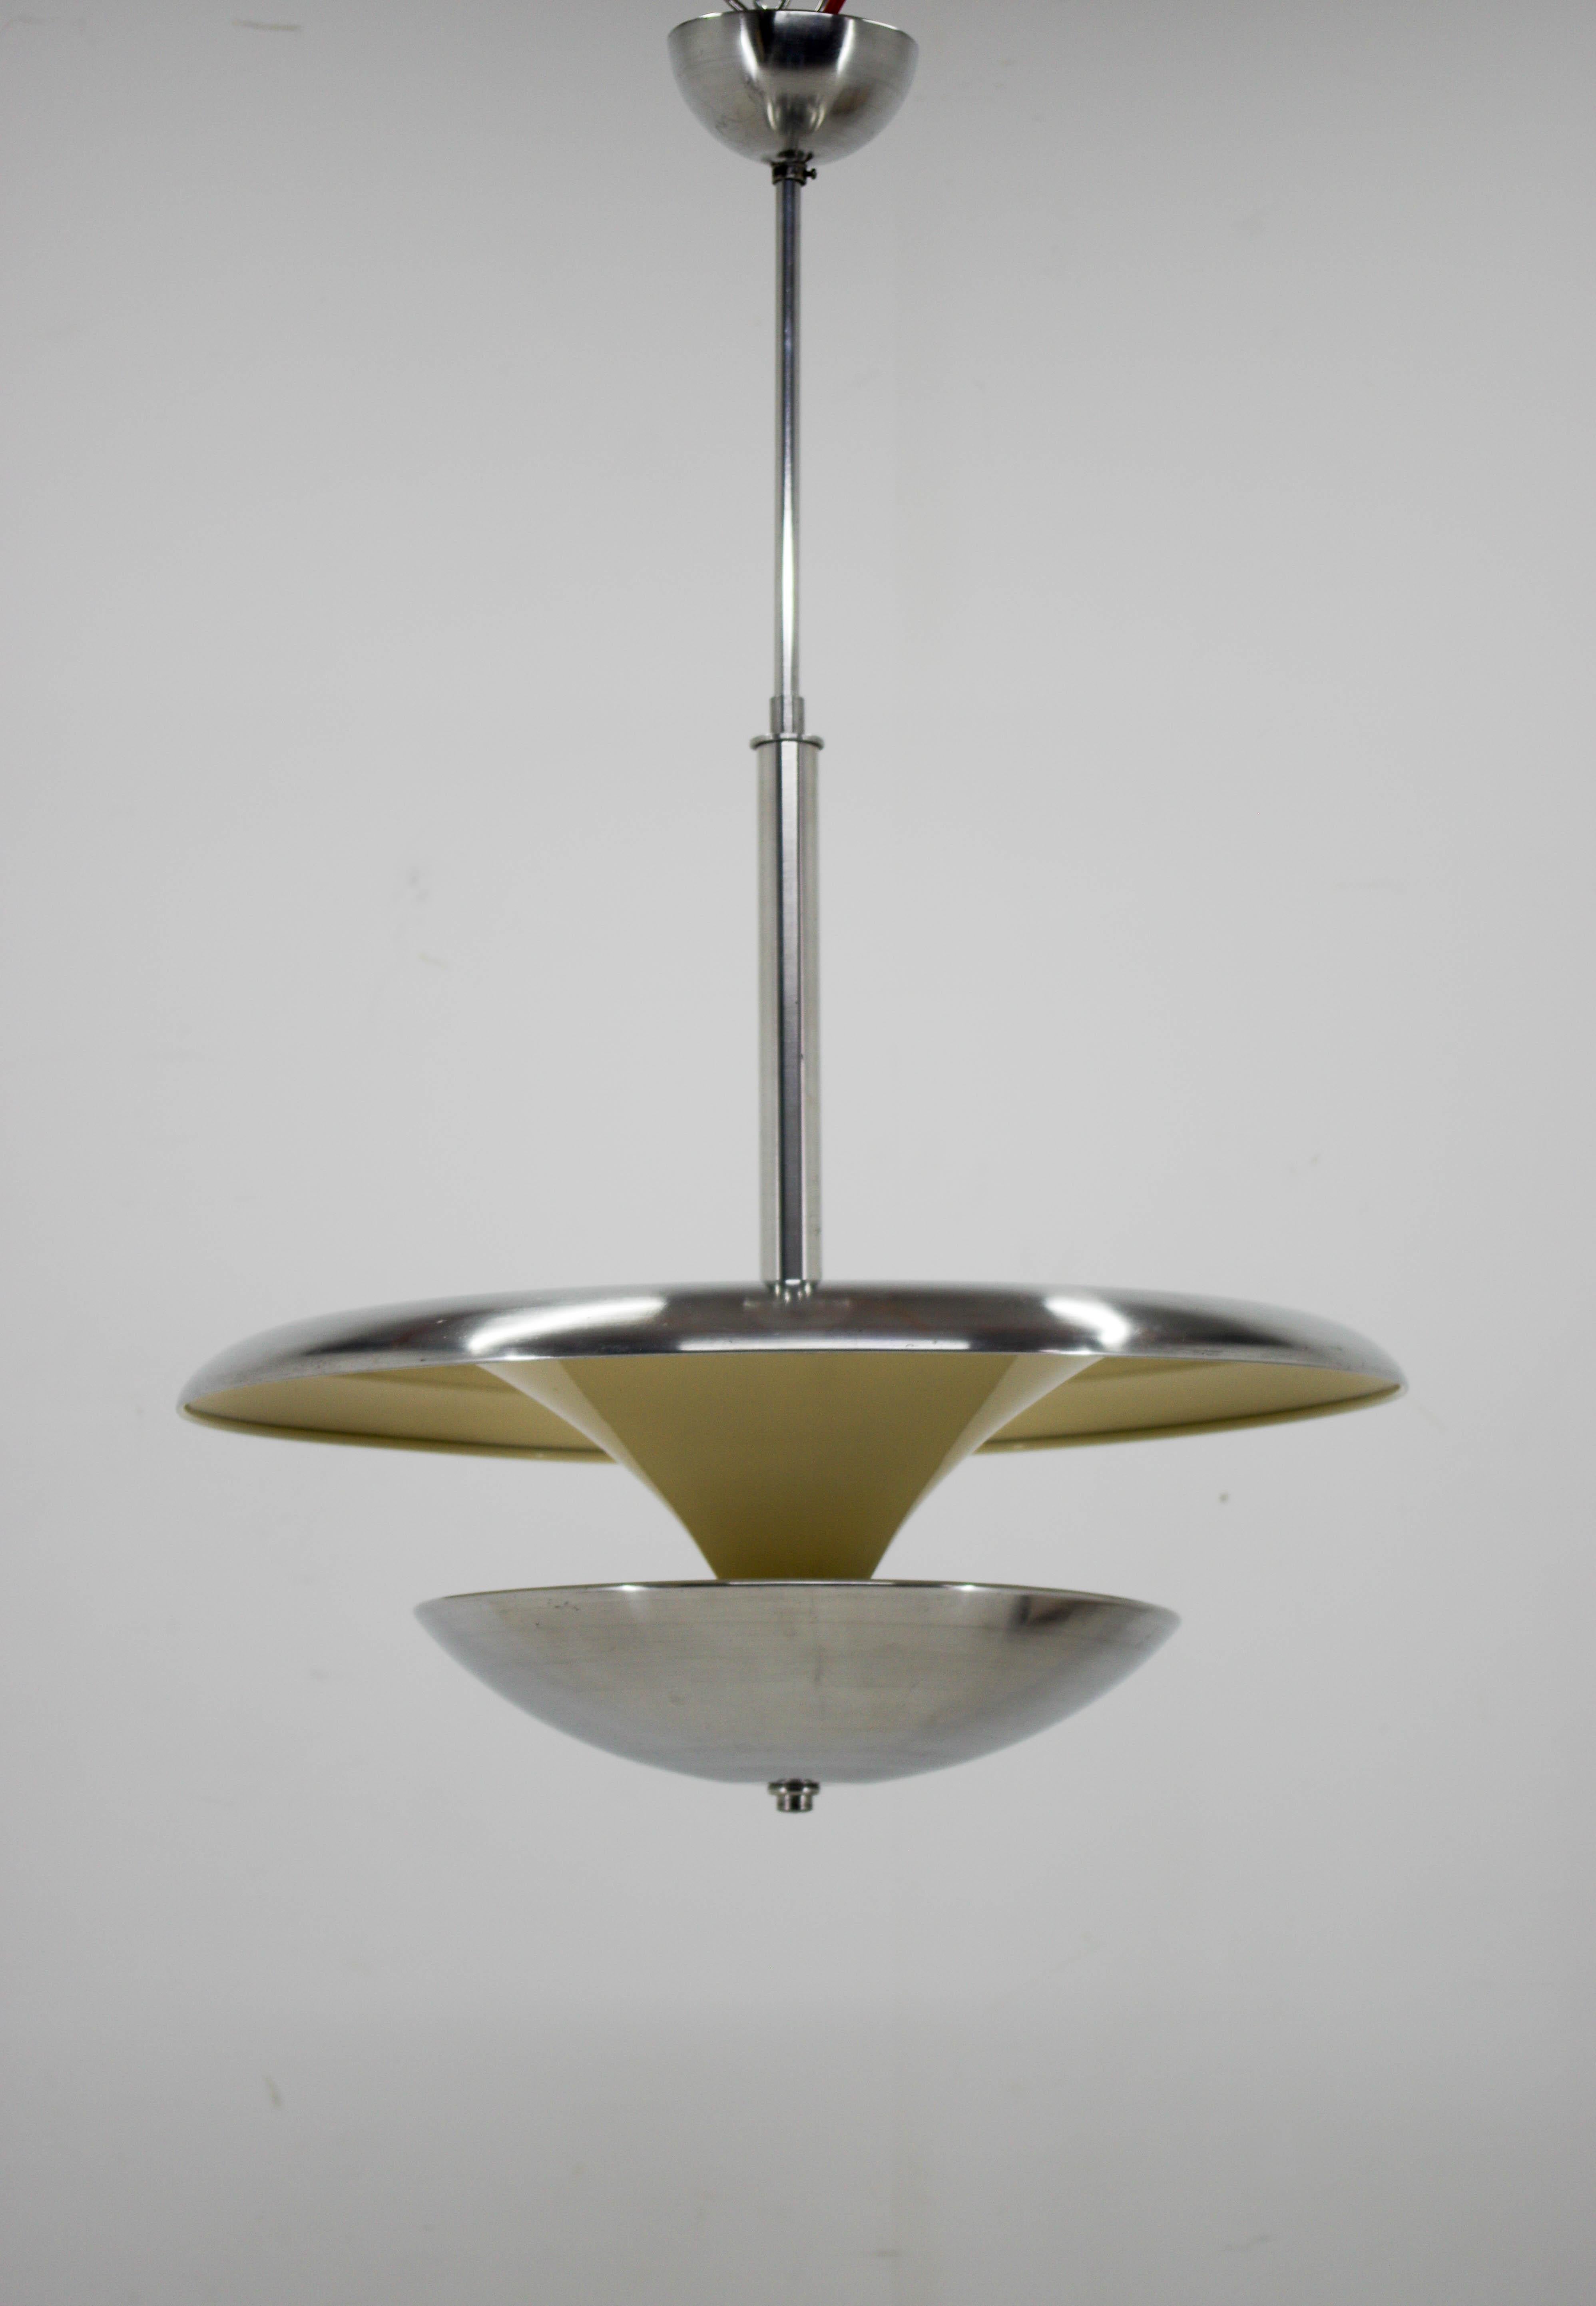 Rare Bauhaus aluminum chandelier made by IAS in 1930s.
Two items available
Restored, new ivory paint, polished, upper plate with minor scratches, bottom plate without any deformations.
Rewired: two separate circuits: 2+3x40W, E25-E27 bulbs. 
US